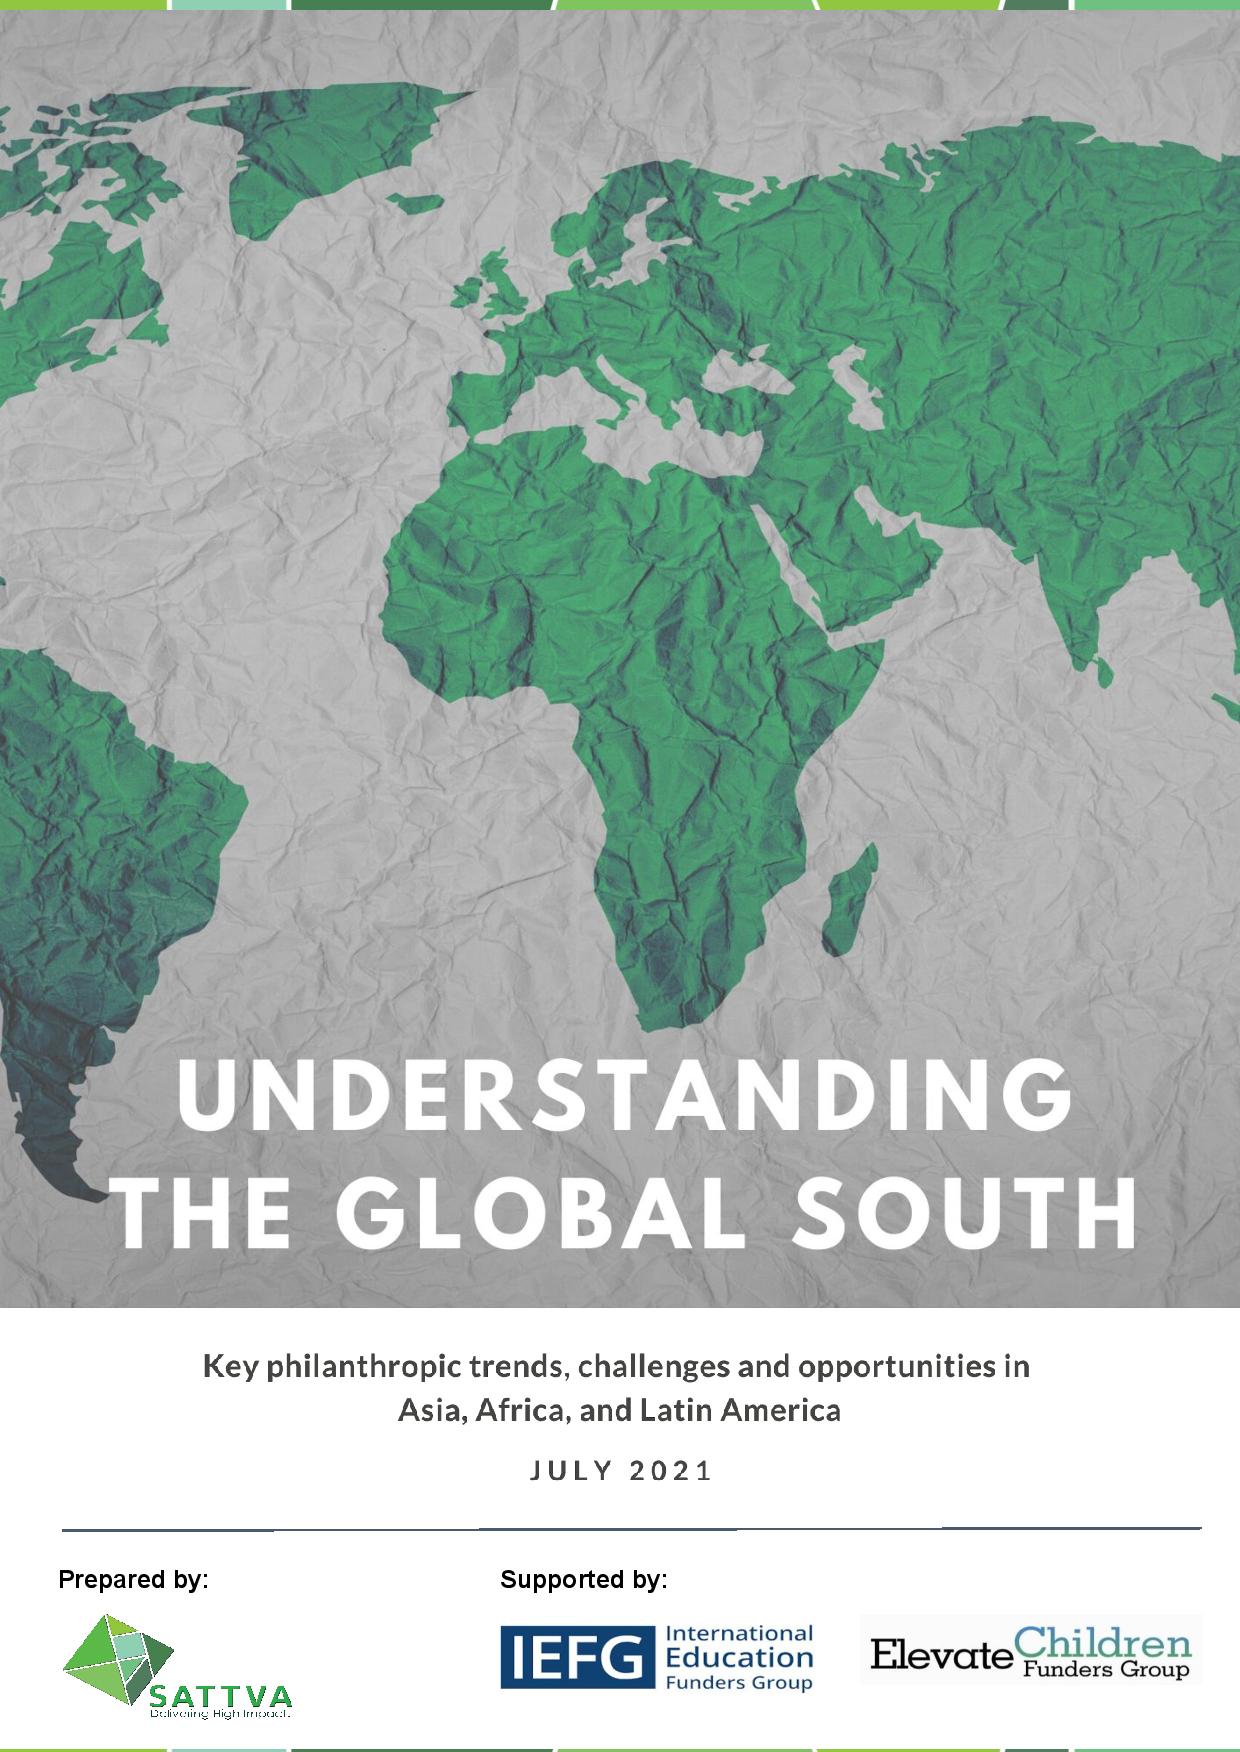 Understanding the Global South: Key philanthropic trends, challenges and opportunities in Asia, Africa, and Latin America